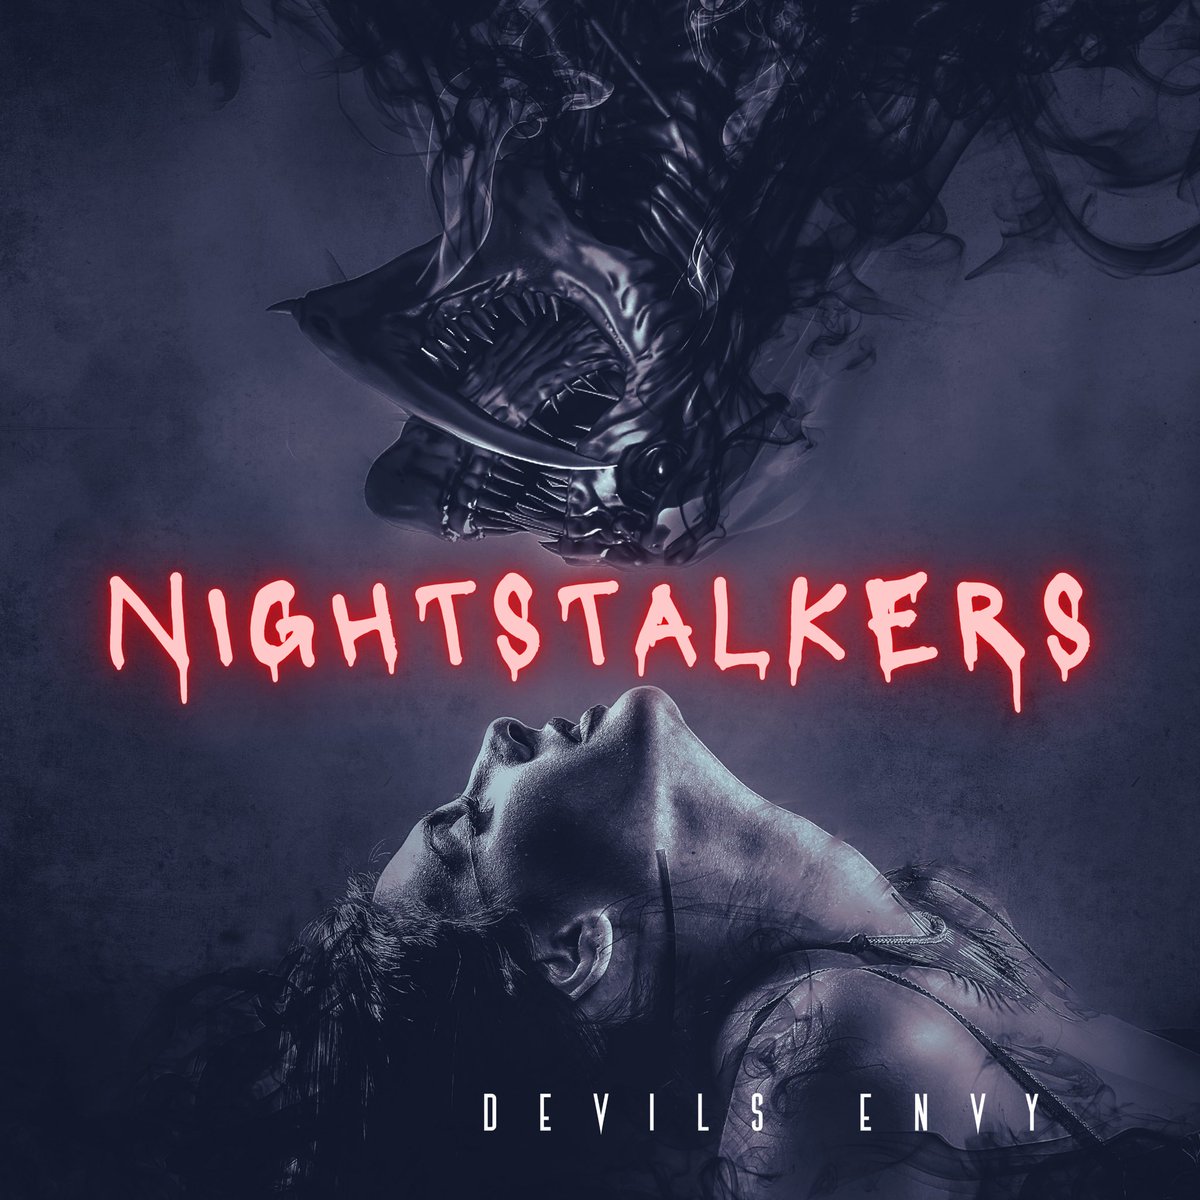 New Year, new music has dropped from @DevilsEnvyMusic!  “Nightstalkers” is out now across all platforms, check the visualizer here: youtu.be/OmMjdZir0Xg?si…

#devilsenvy #newmusic #newrock #nightstalkers #dvlsnv